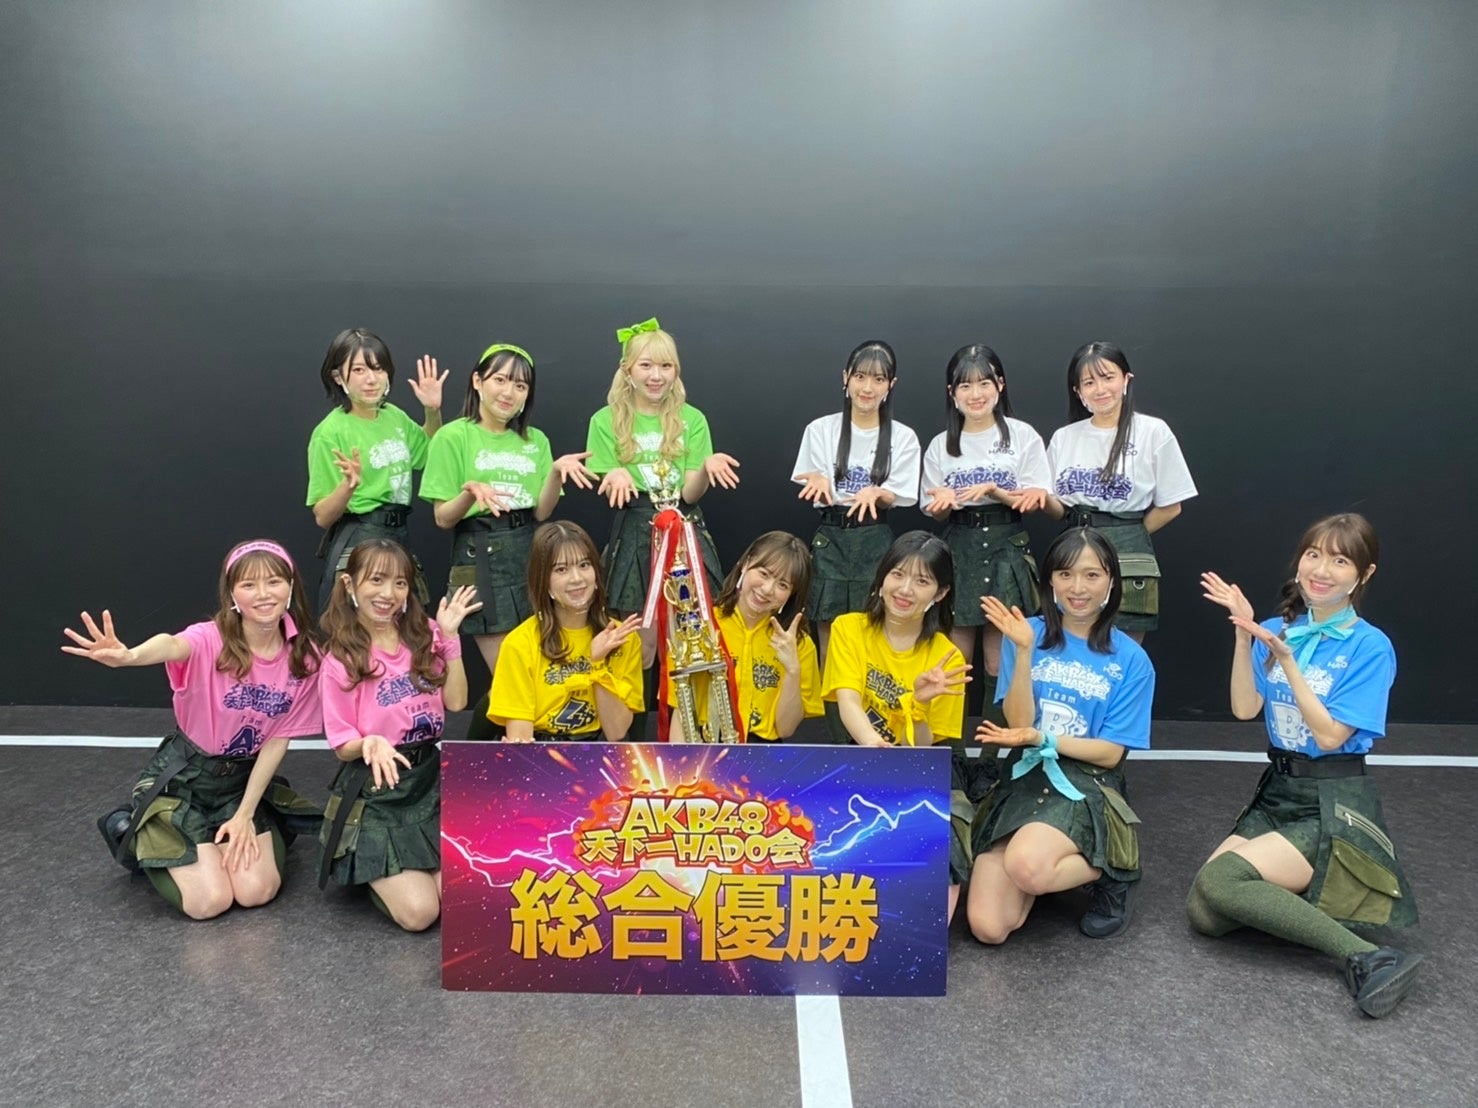 「AKB48天下一HADO会」シーズン2は倉野尾チーム4が総合優勝！のサブ画像2